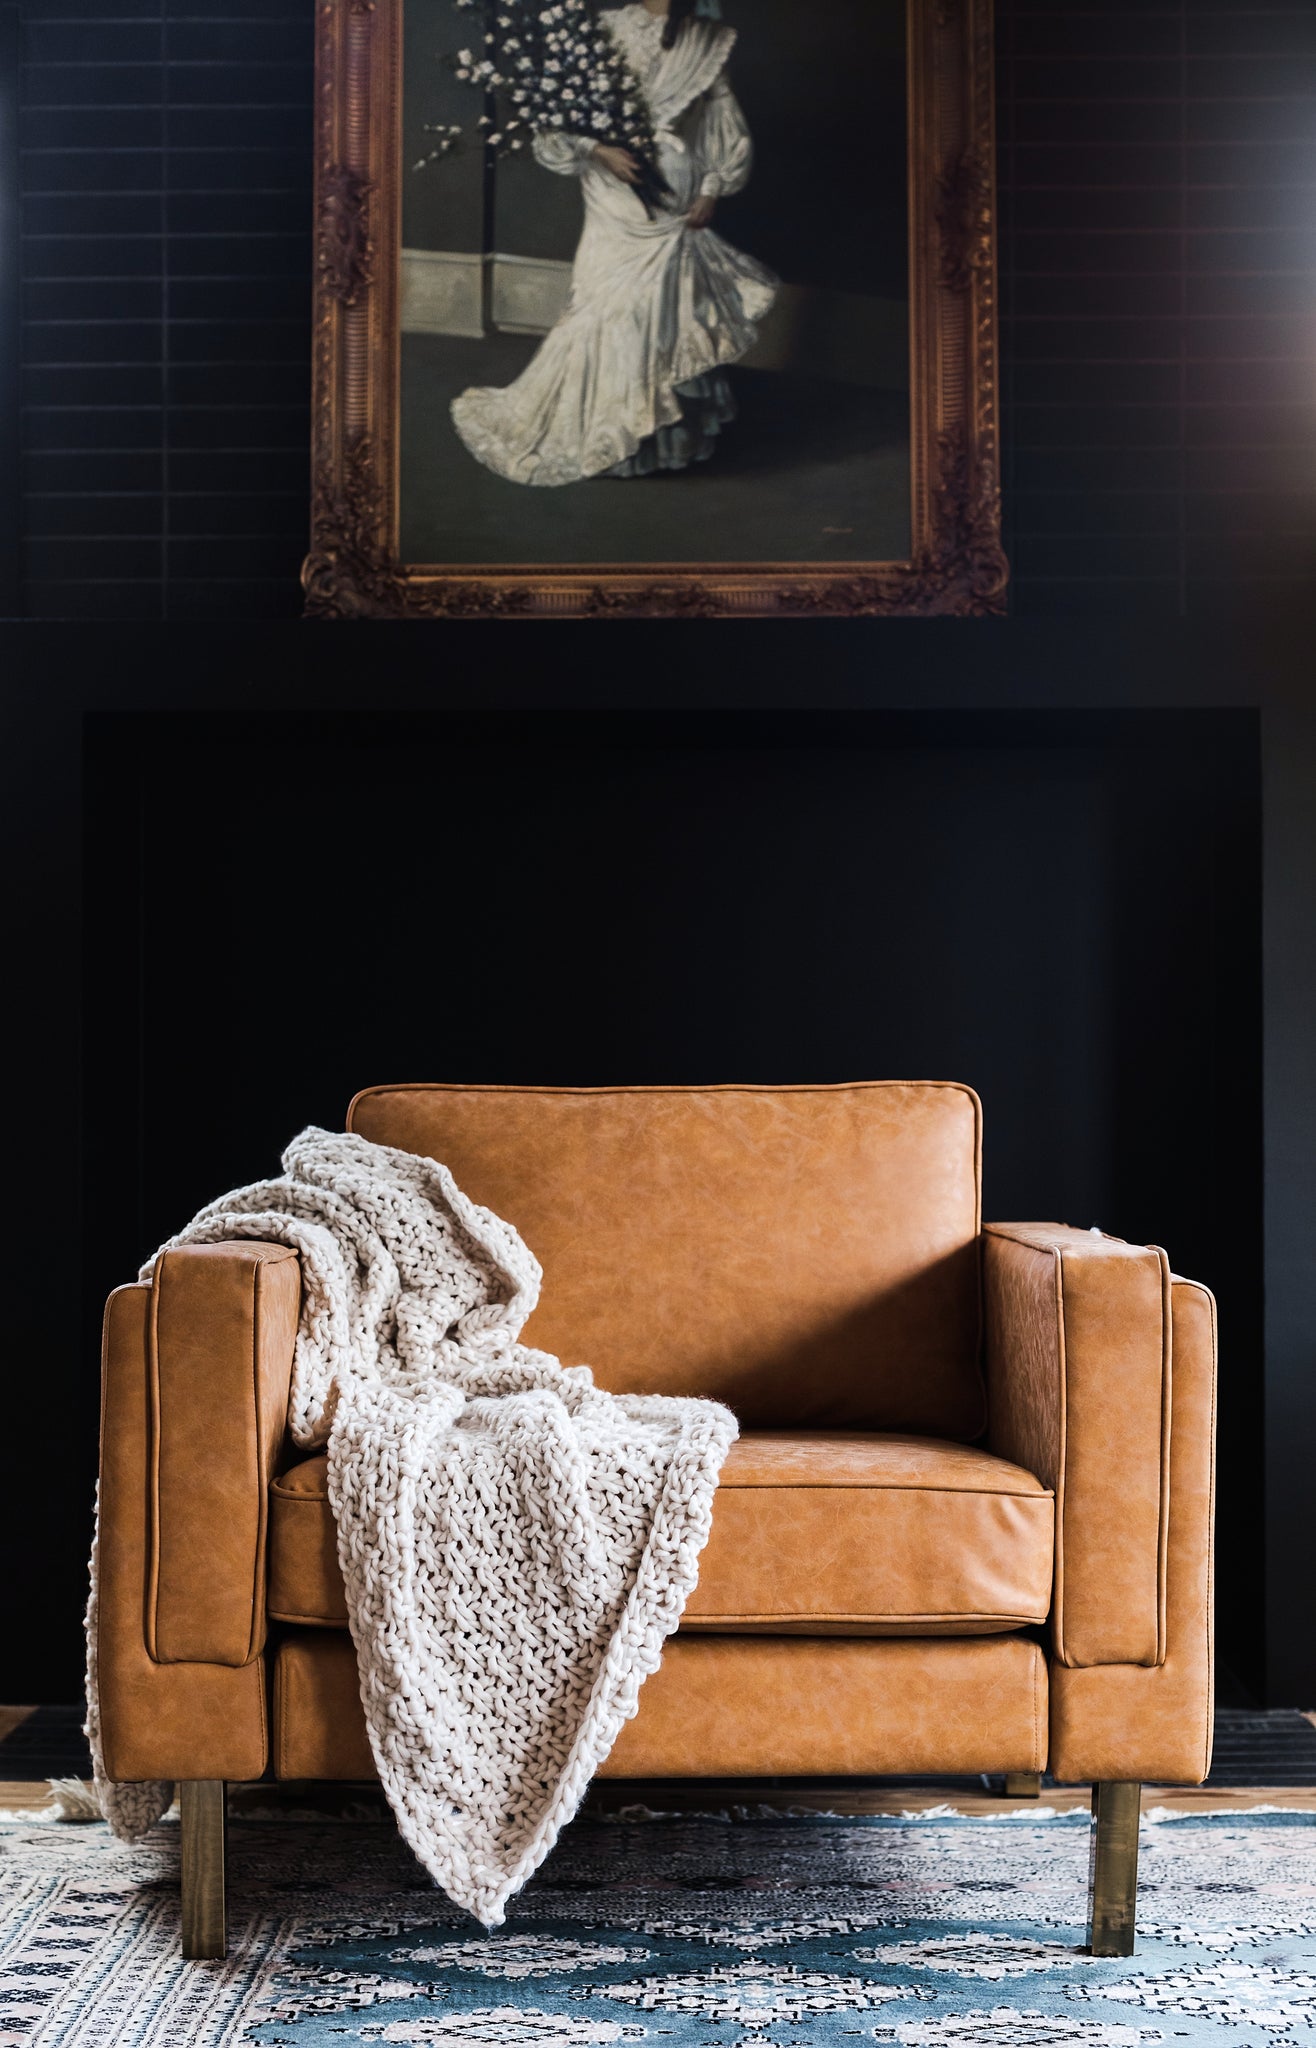 albany armchair shown in distressed vegan leather with gold legs